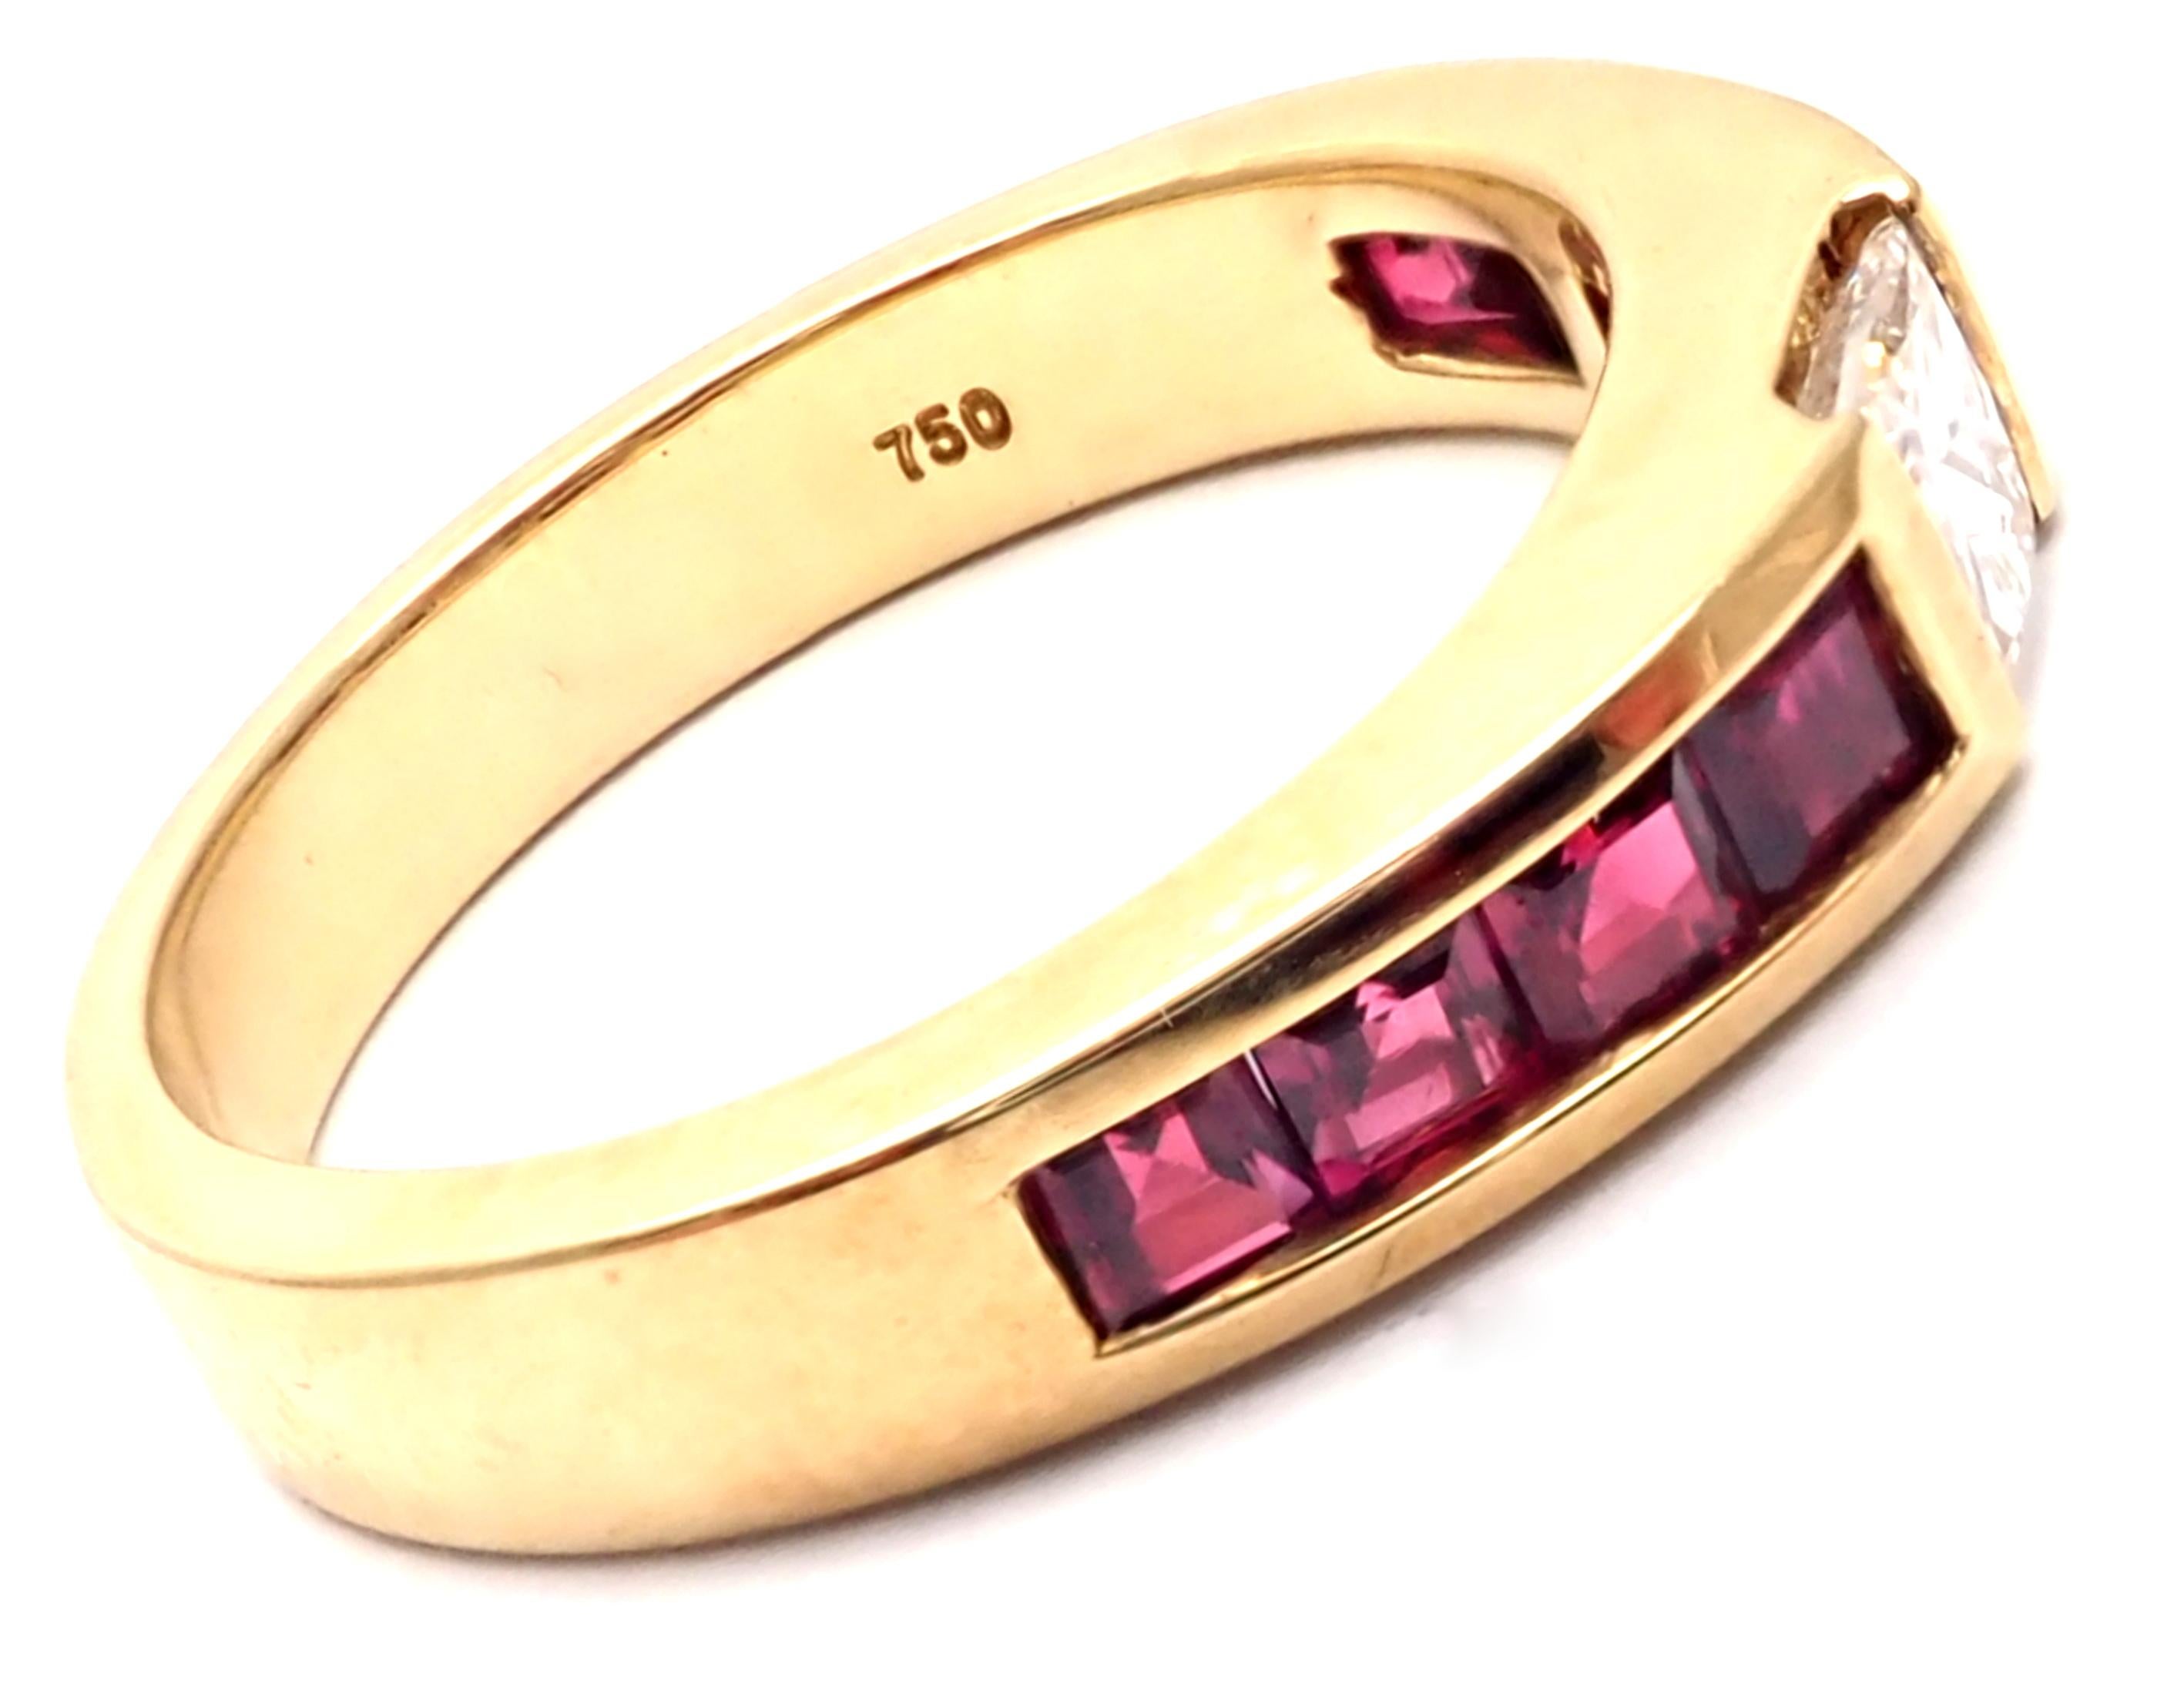 18k Yellow Gold Diamond Ruby Band Ring by Tiffany & Co.
With 1 princess cut diamond VS1 clarity G color total weight approx. .35ct
4 rubies approximately .80ct
Details: 
Ring Size: 4 3/4, can be resized.
Weight: 4 grams
Width: 4mm
Stamped Hallmarks: